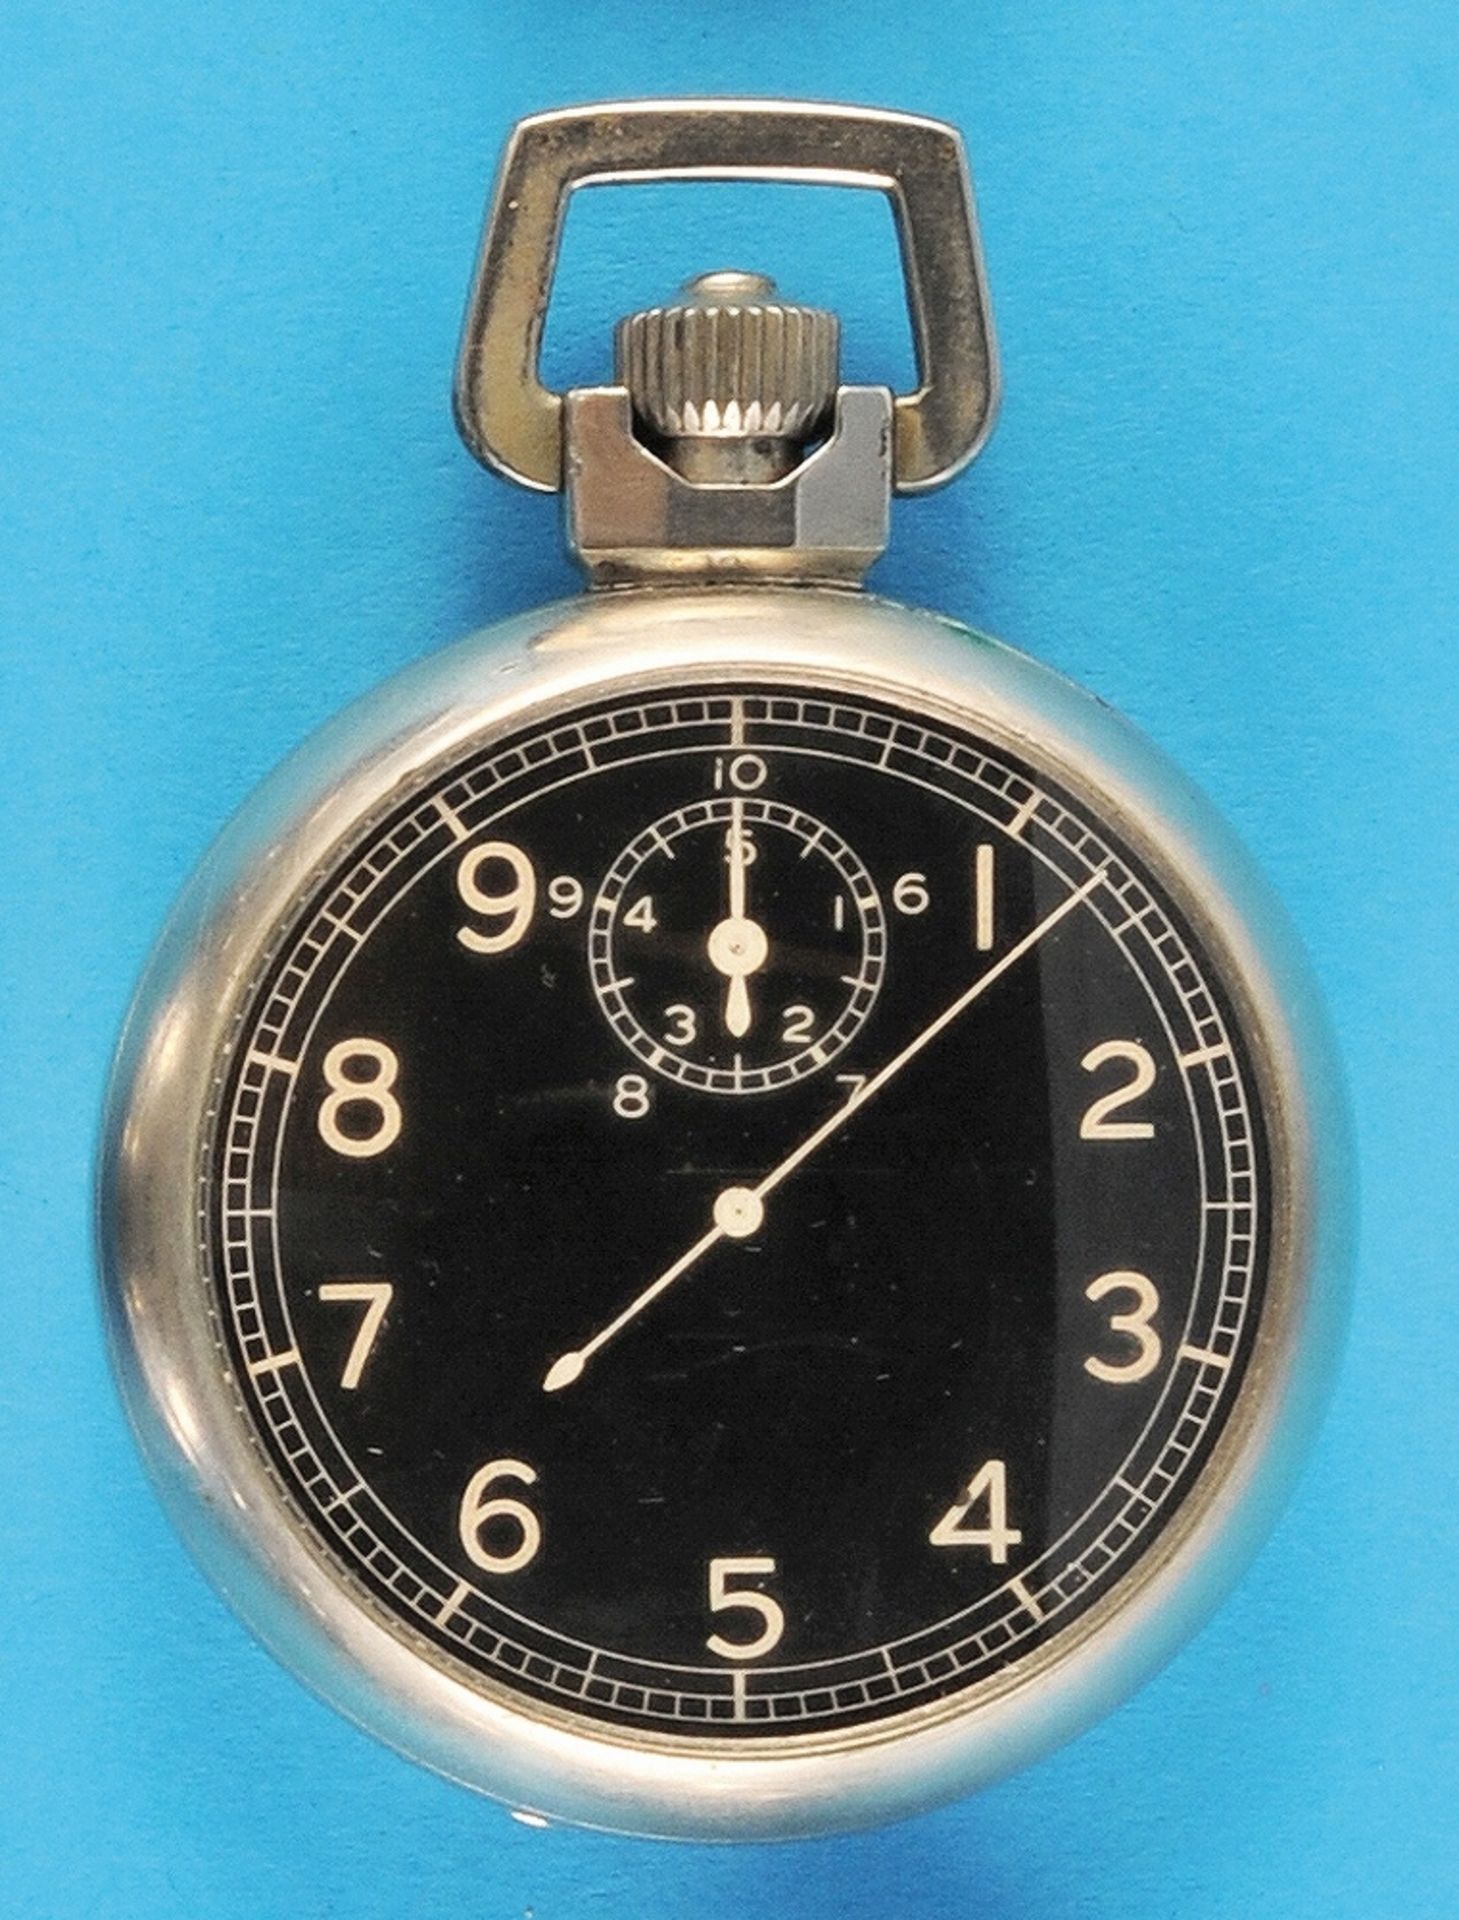 Elgin Natl. Watch Co., USA, rare 1/10 second stopwatch with 5-minute counter, smooth case with inner